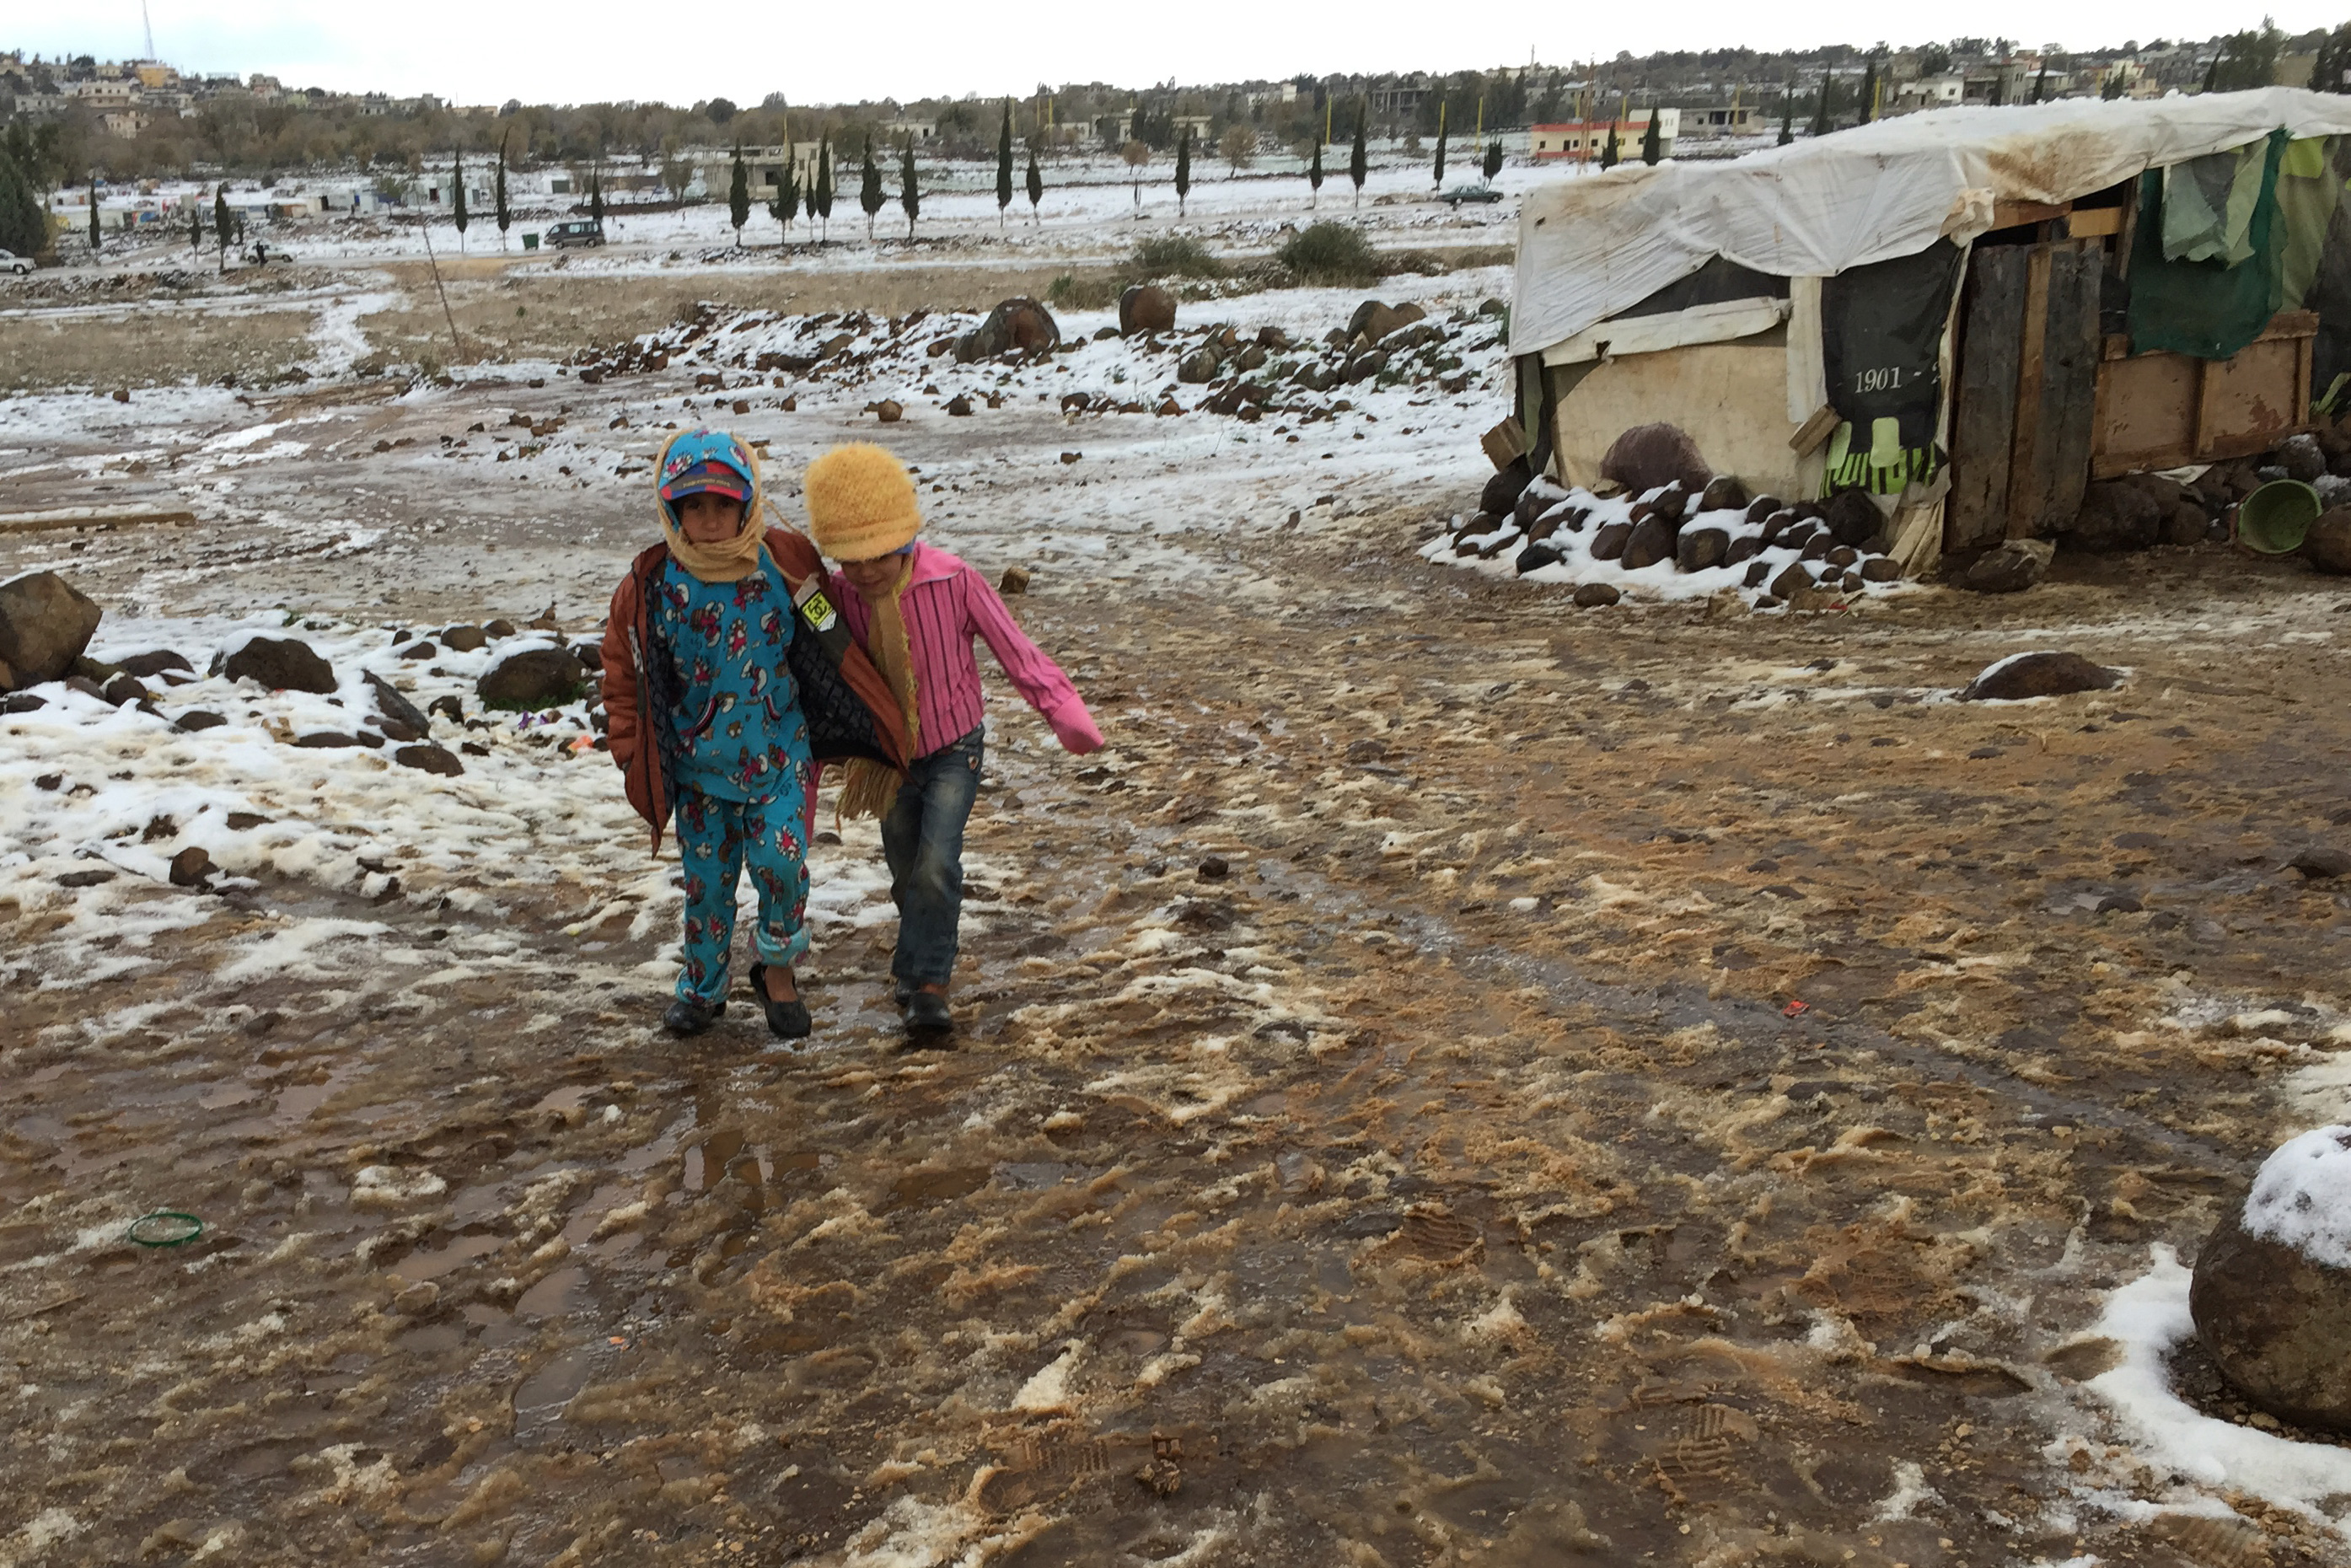 Syrian refugee children try to make their way through the snow and slurry in Lebanon.